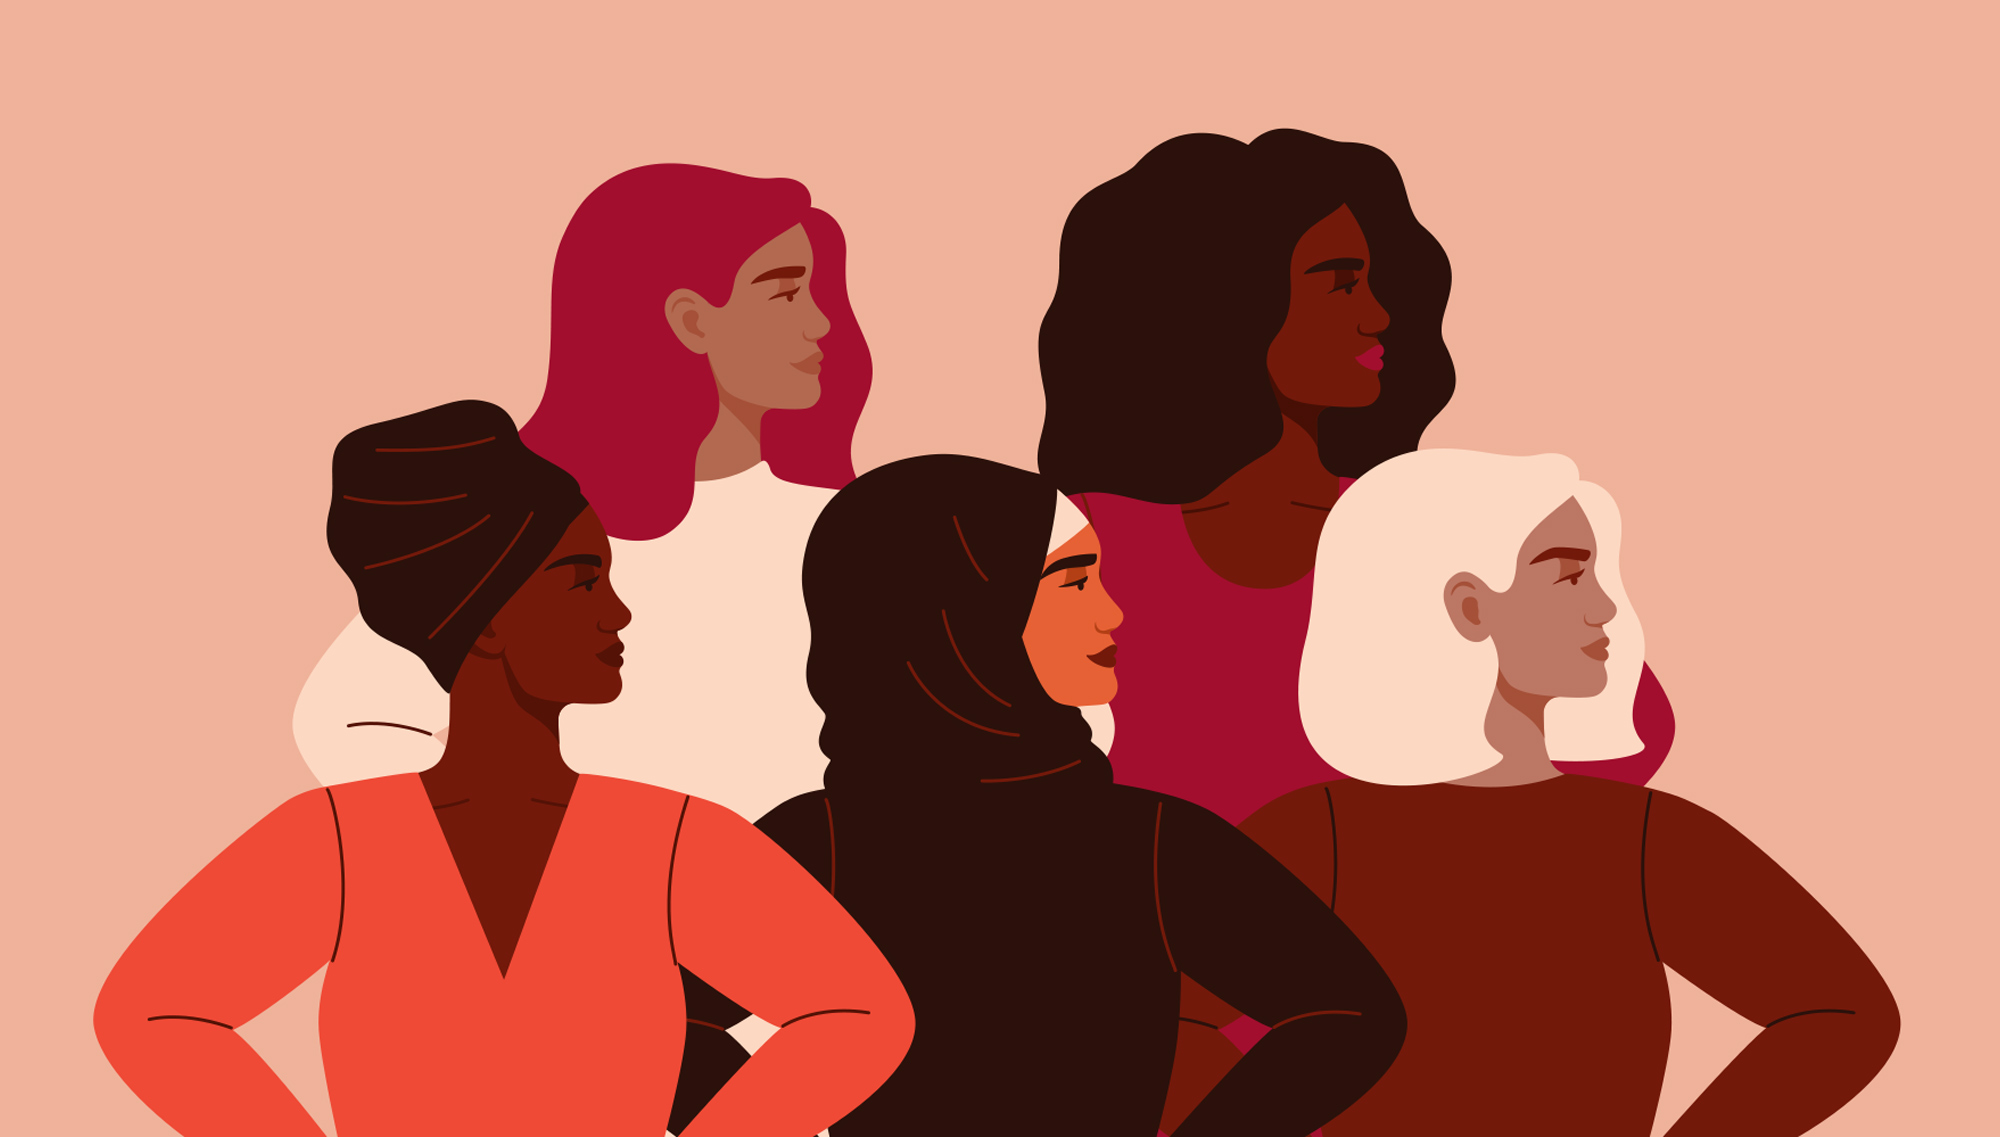 Illustration of five ethnically diverse women